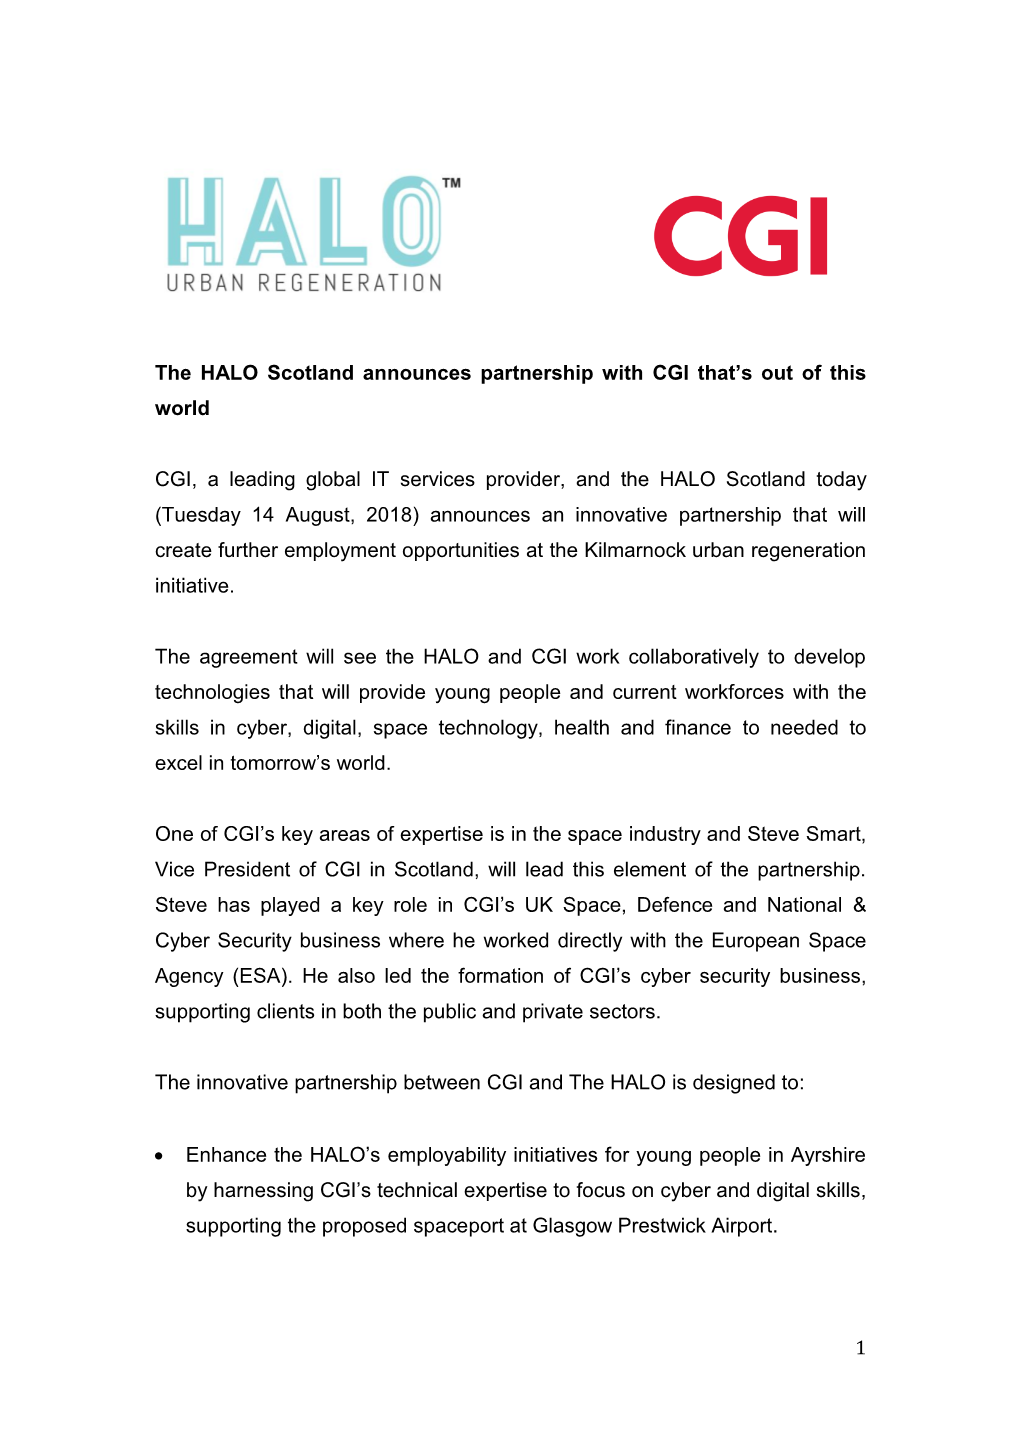 1 the HALO Scotland Announces Partnership with CGI That's out Of